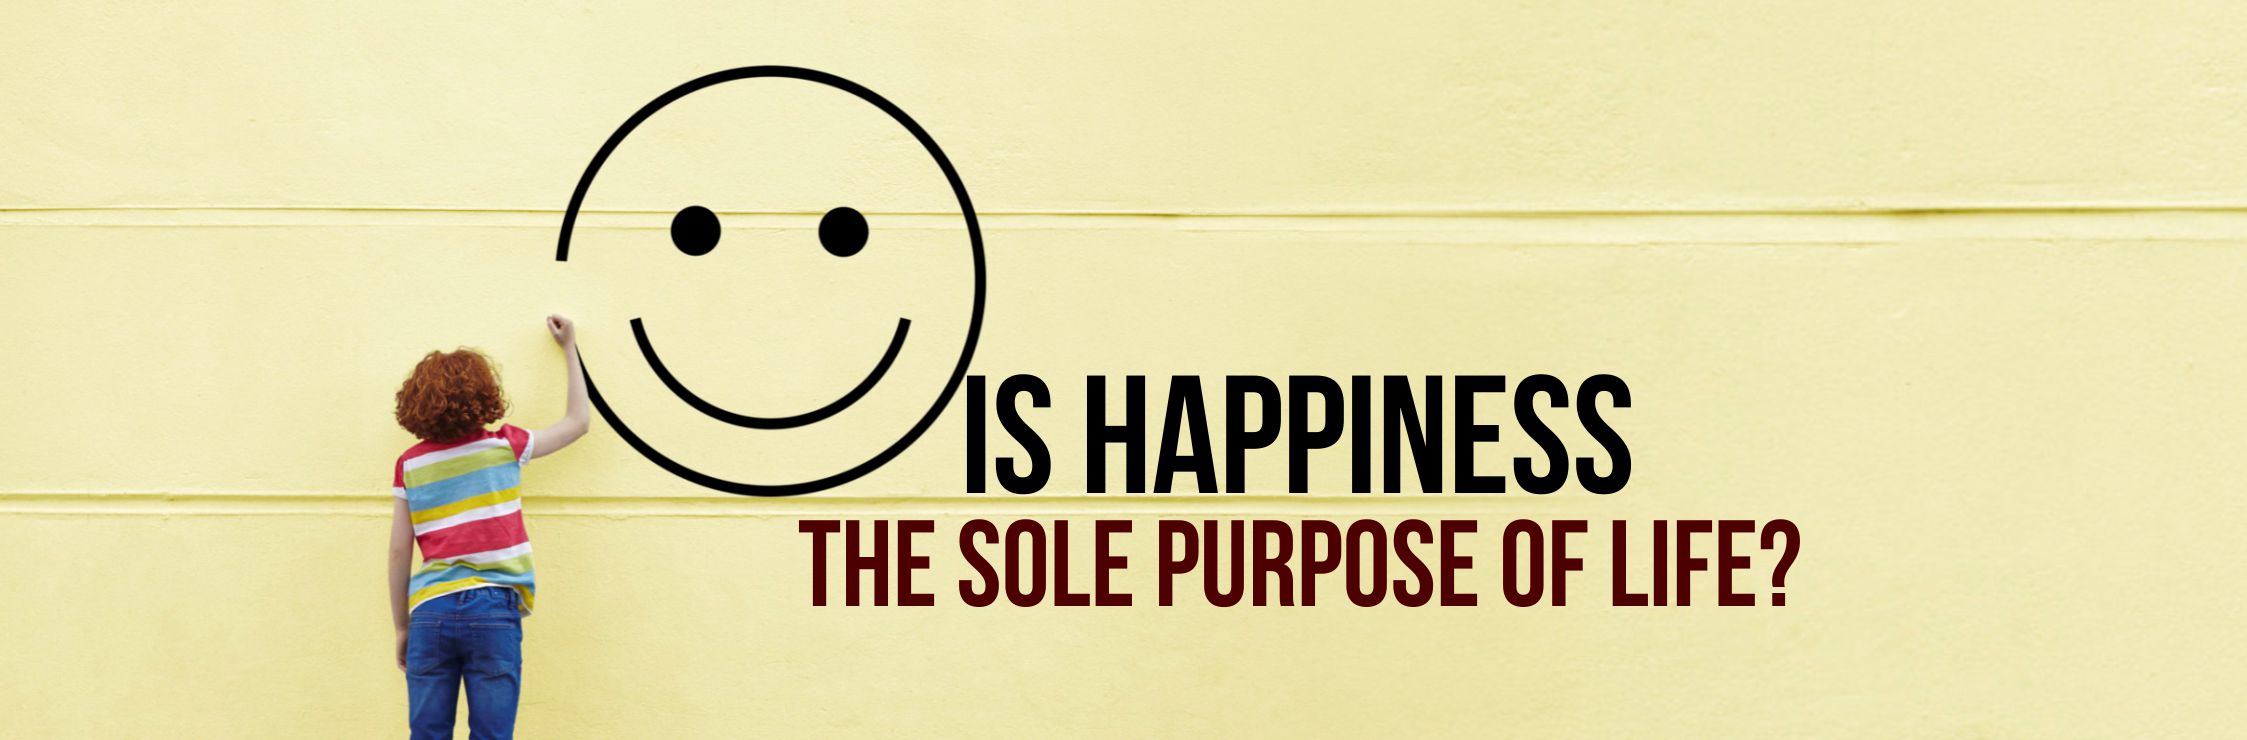 Is happiness the sole purpose of life? - QomTV